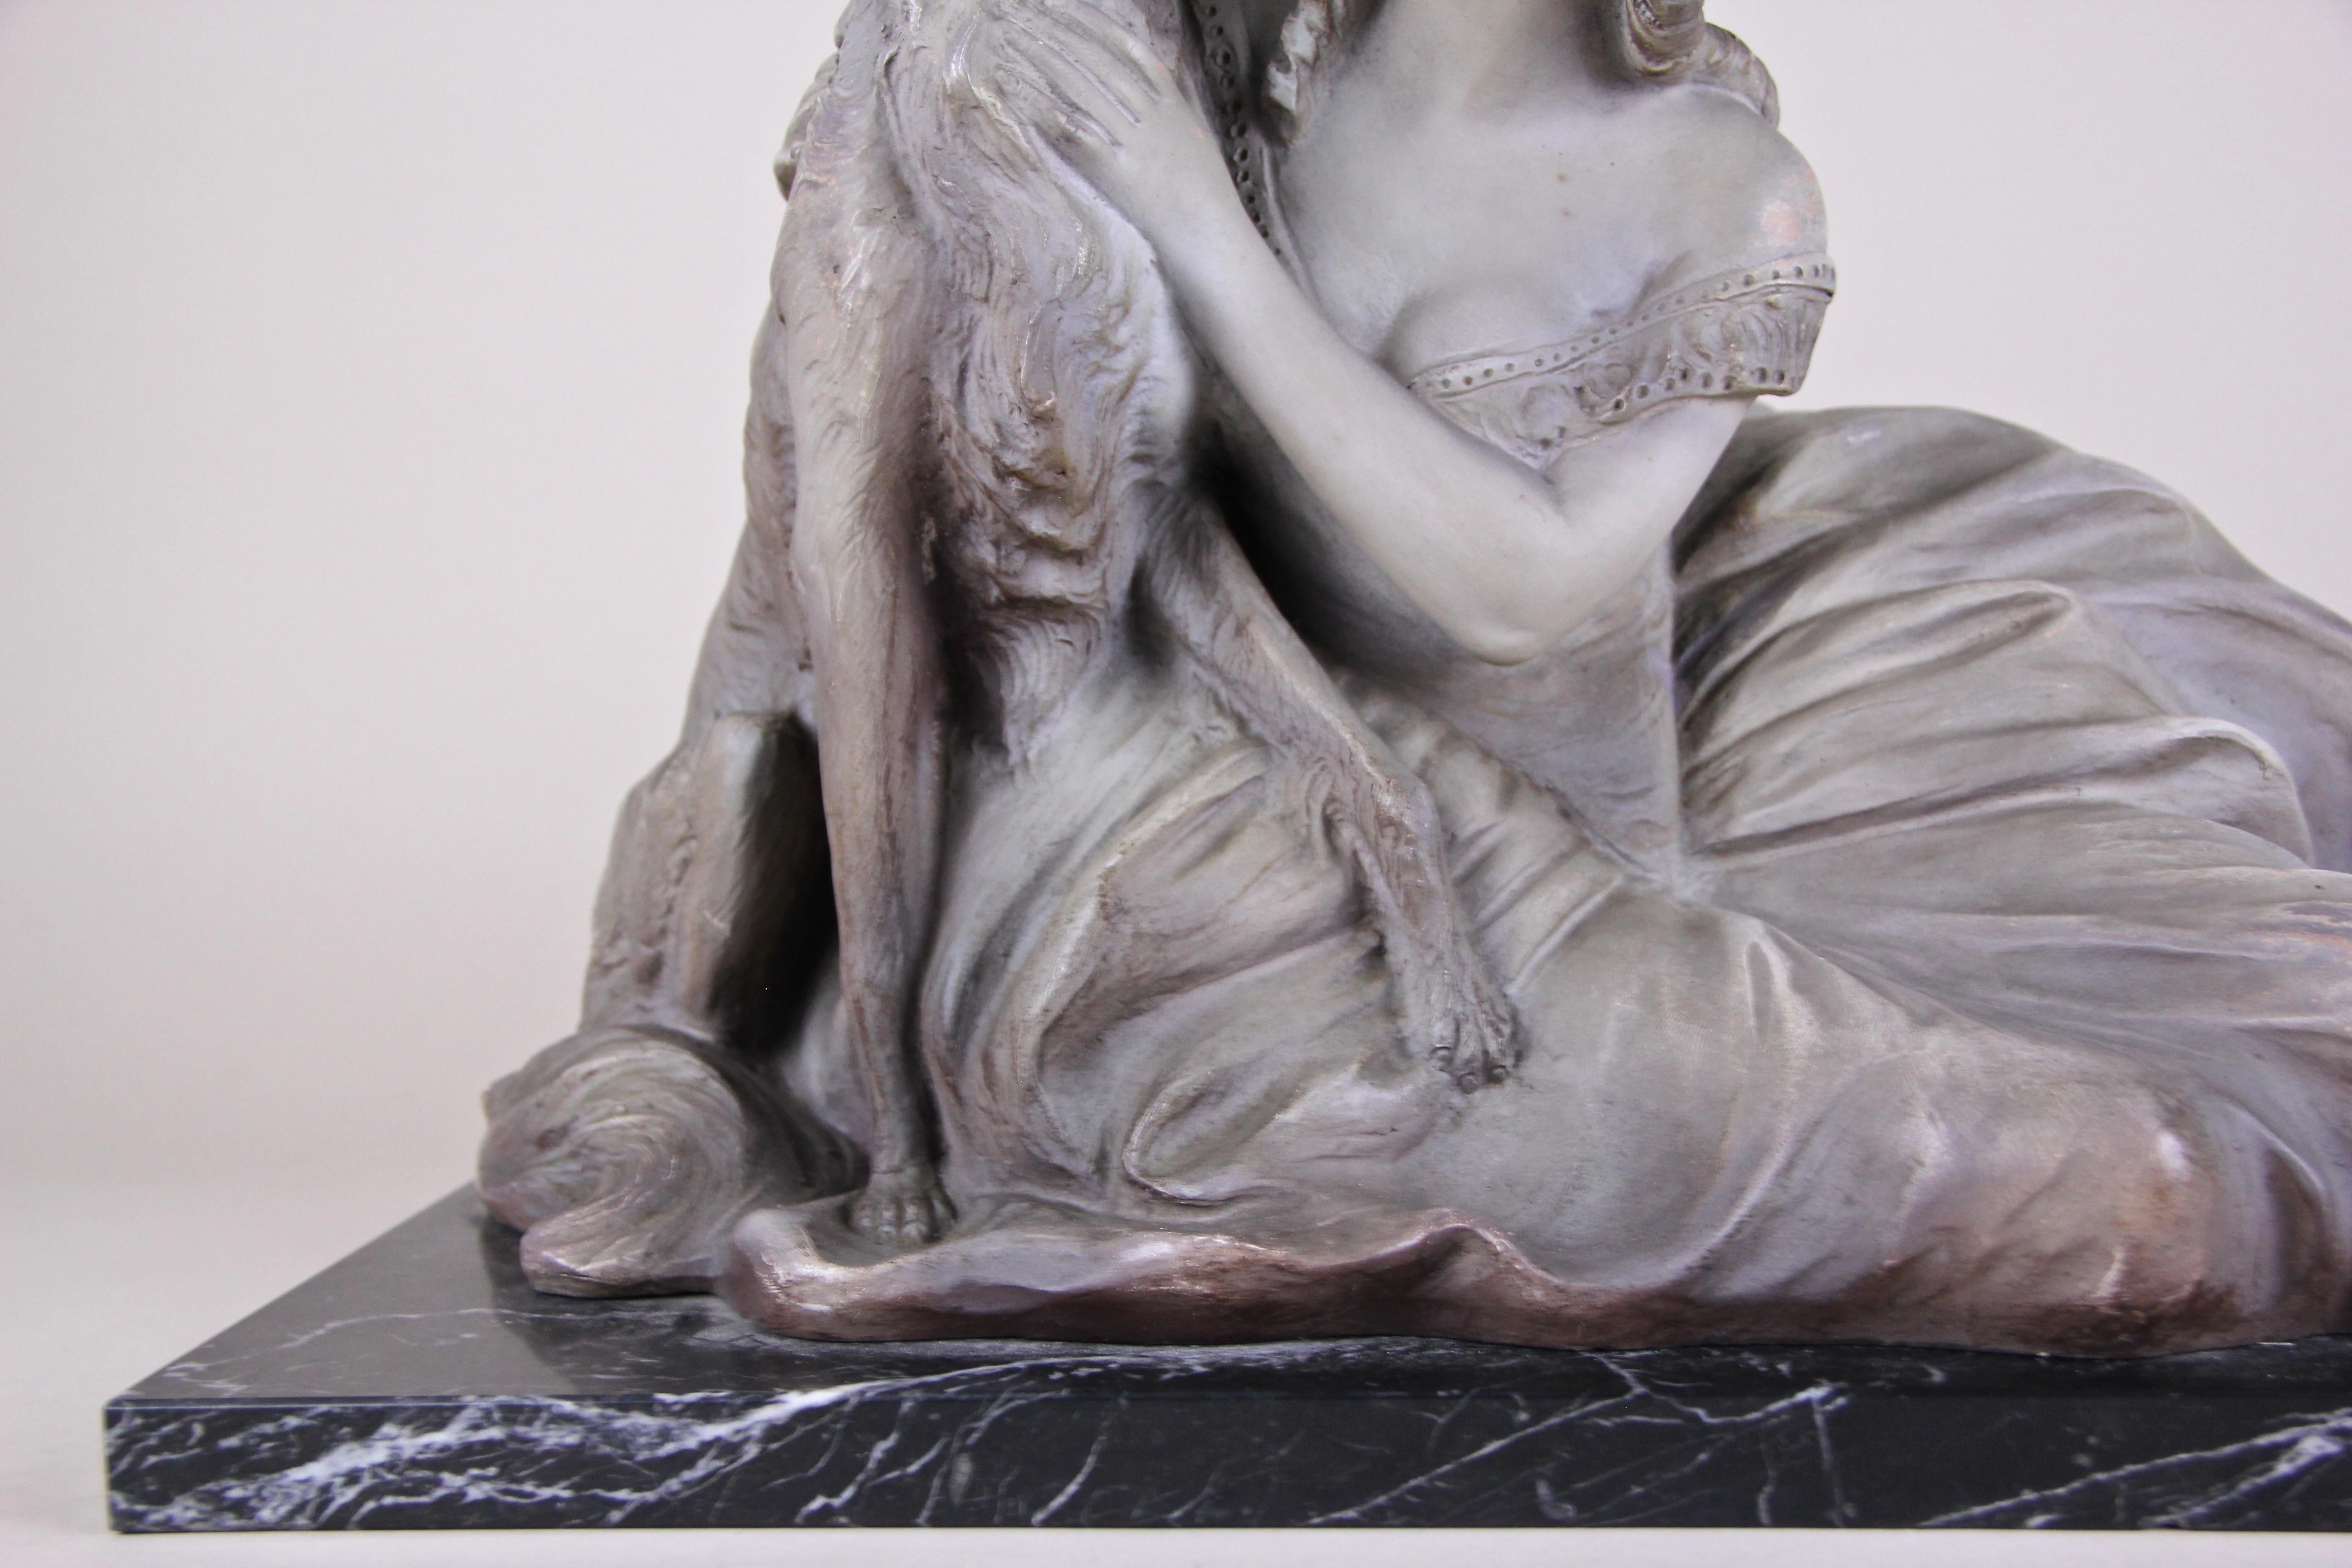 20th Century Art Deco Terracotta Sculpture on Black Marble Base, Signed, France, circa 1920